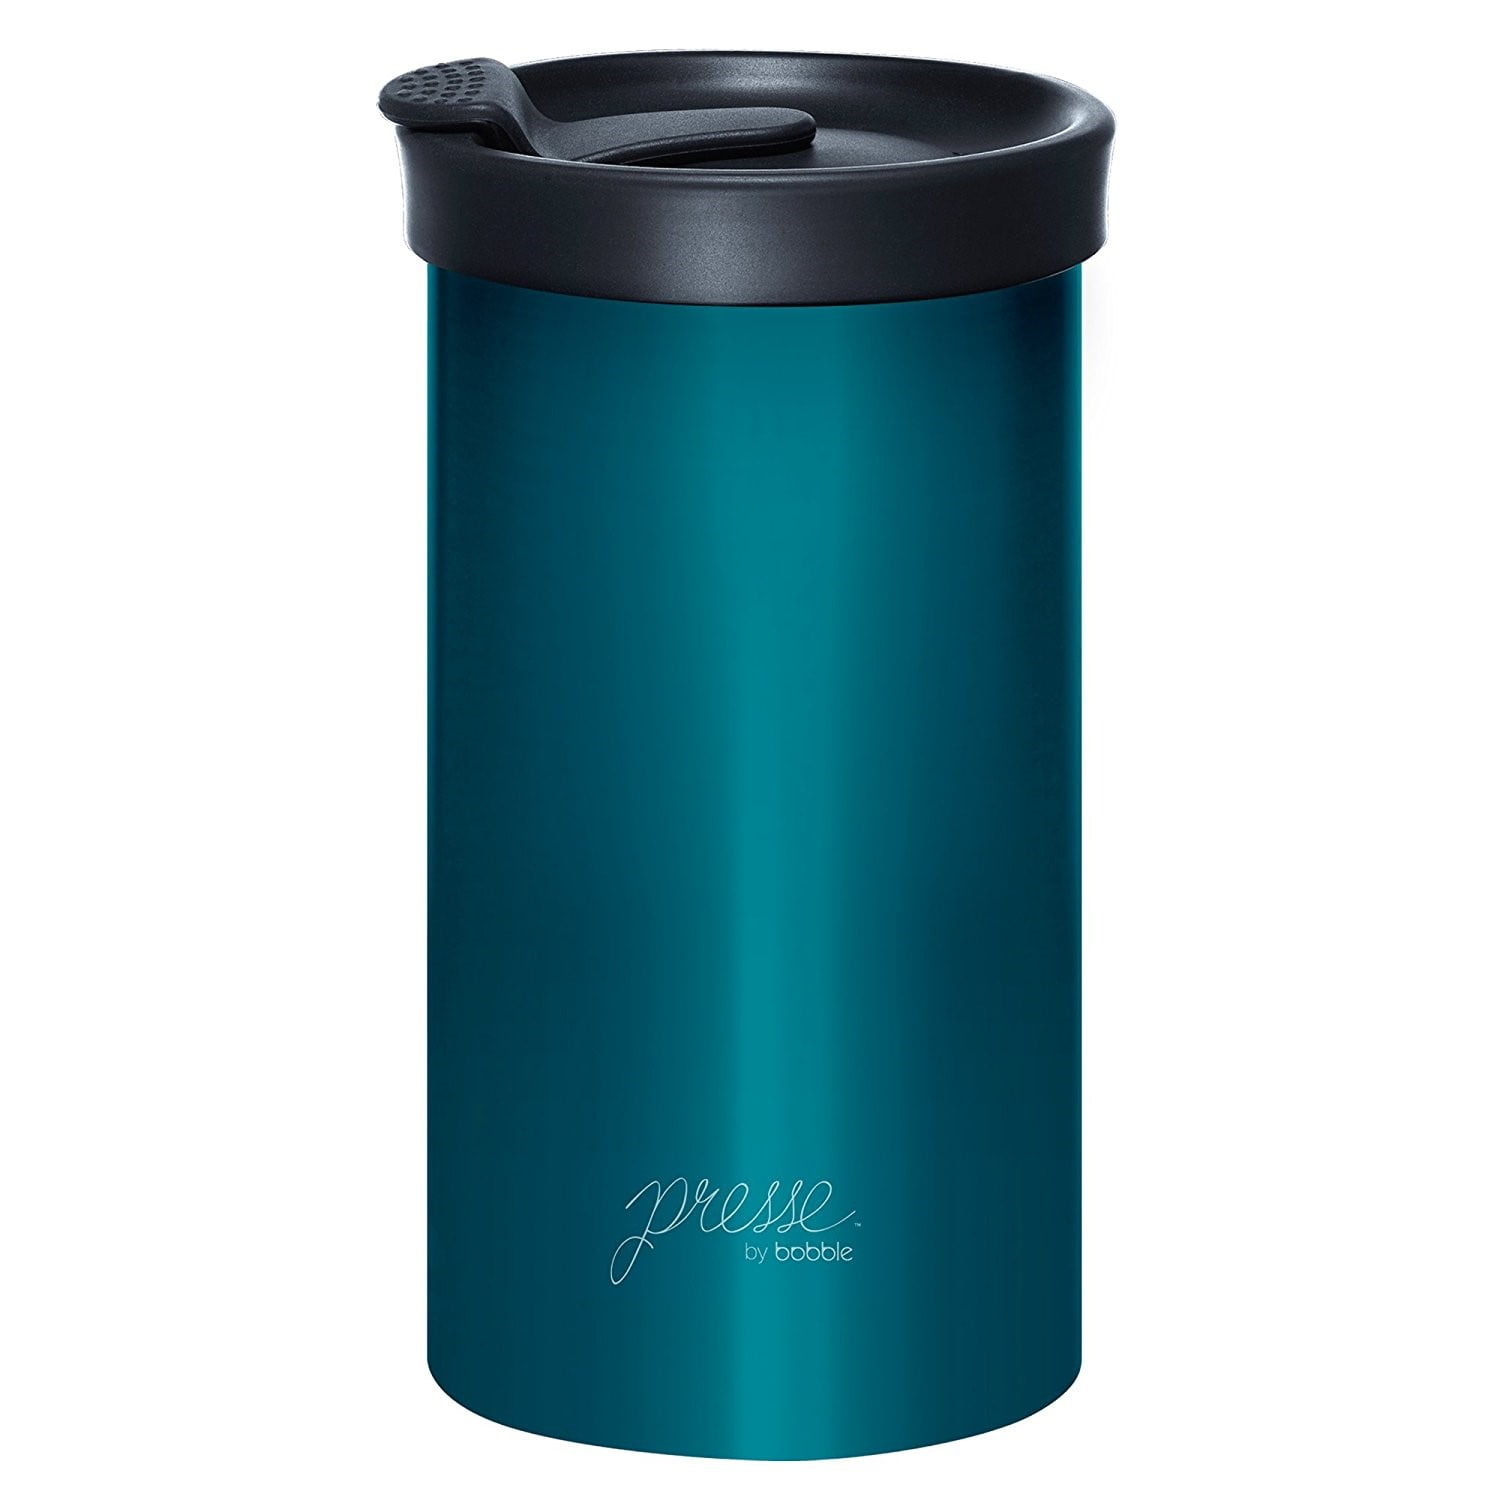 On The Go Brewer Peacock Portable Coffee Brewer and Tumbler in One Presse by bobble Coffee & Tea Maker 13 oz Brew Press & Go Stainless Steel Travel Tumbler Press Coffee Maker